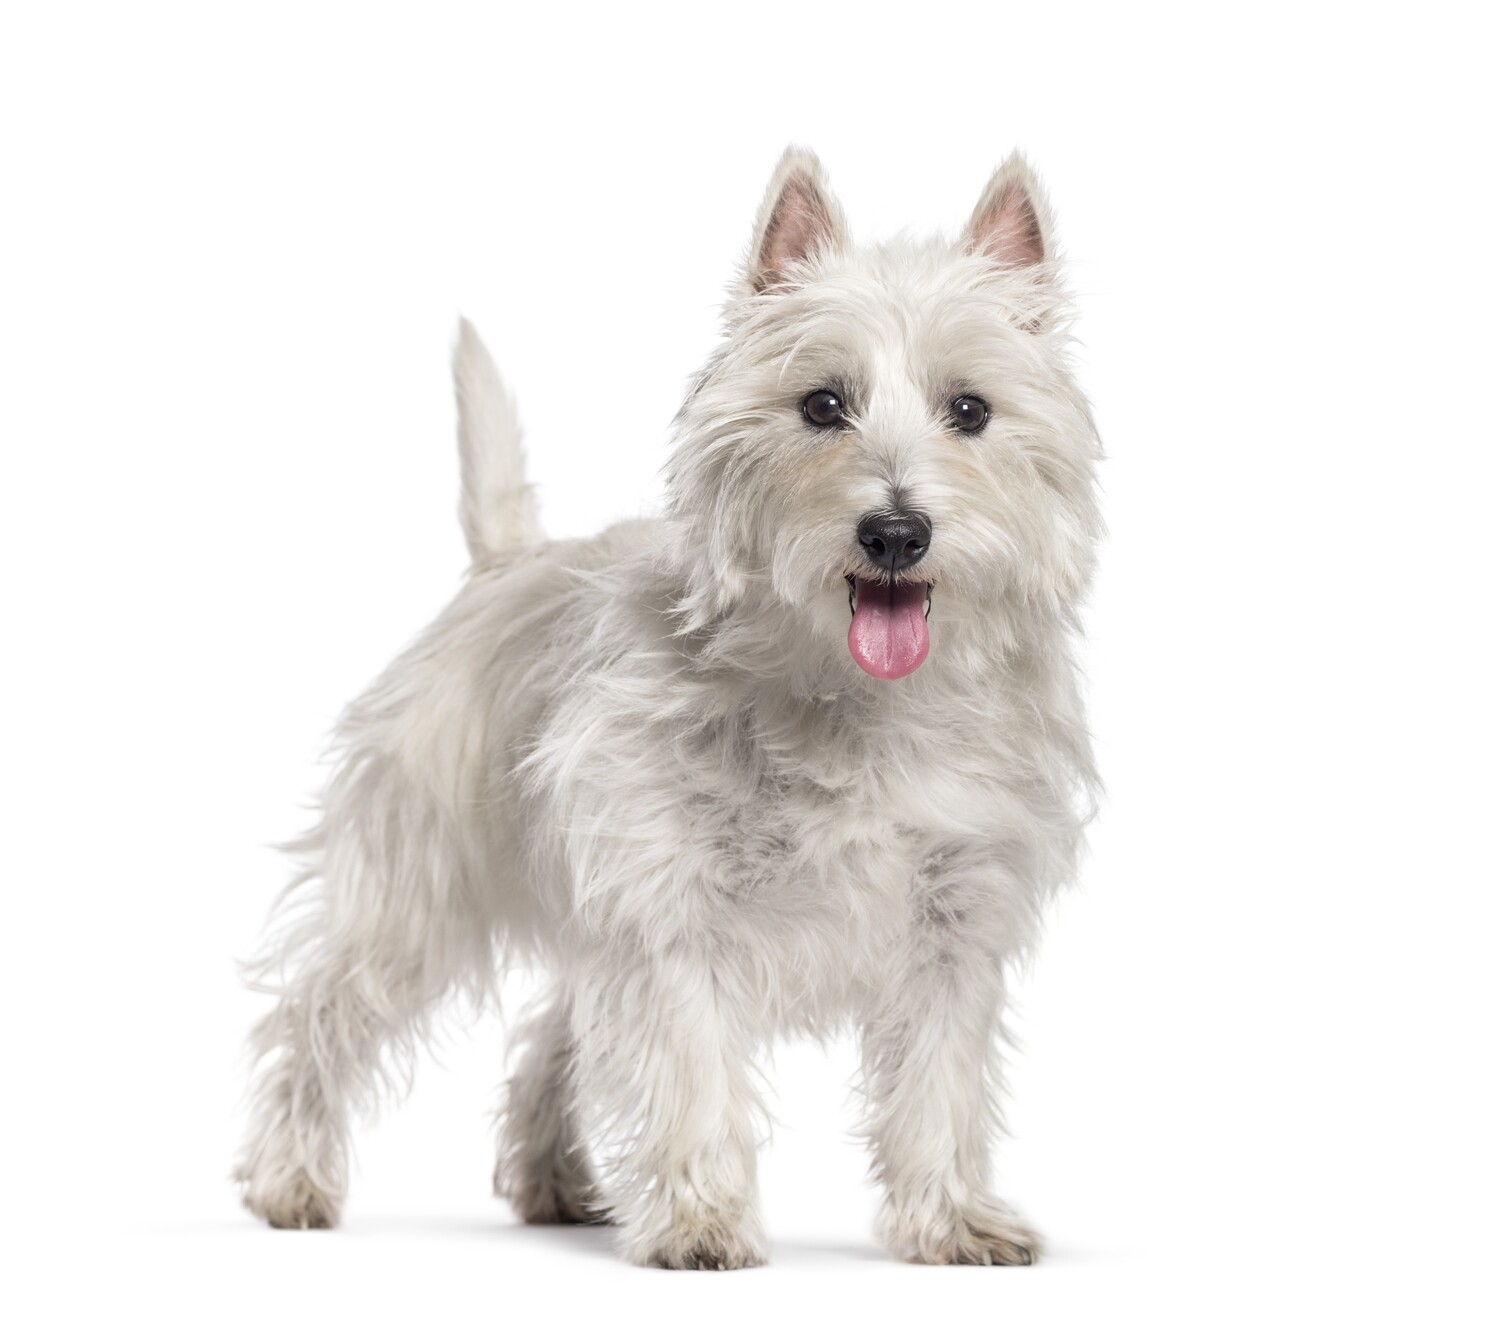 Compensation certificate for 400 kg of CO2 - West Highland White Terrier